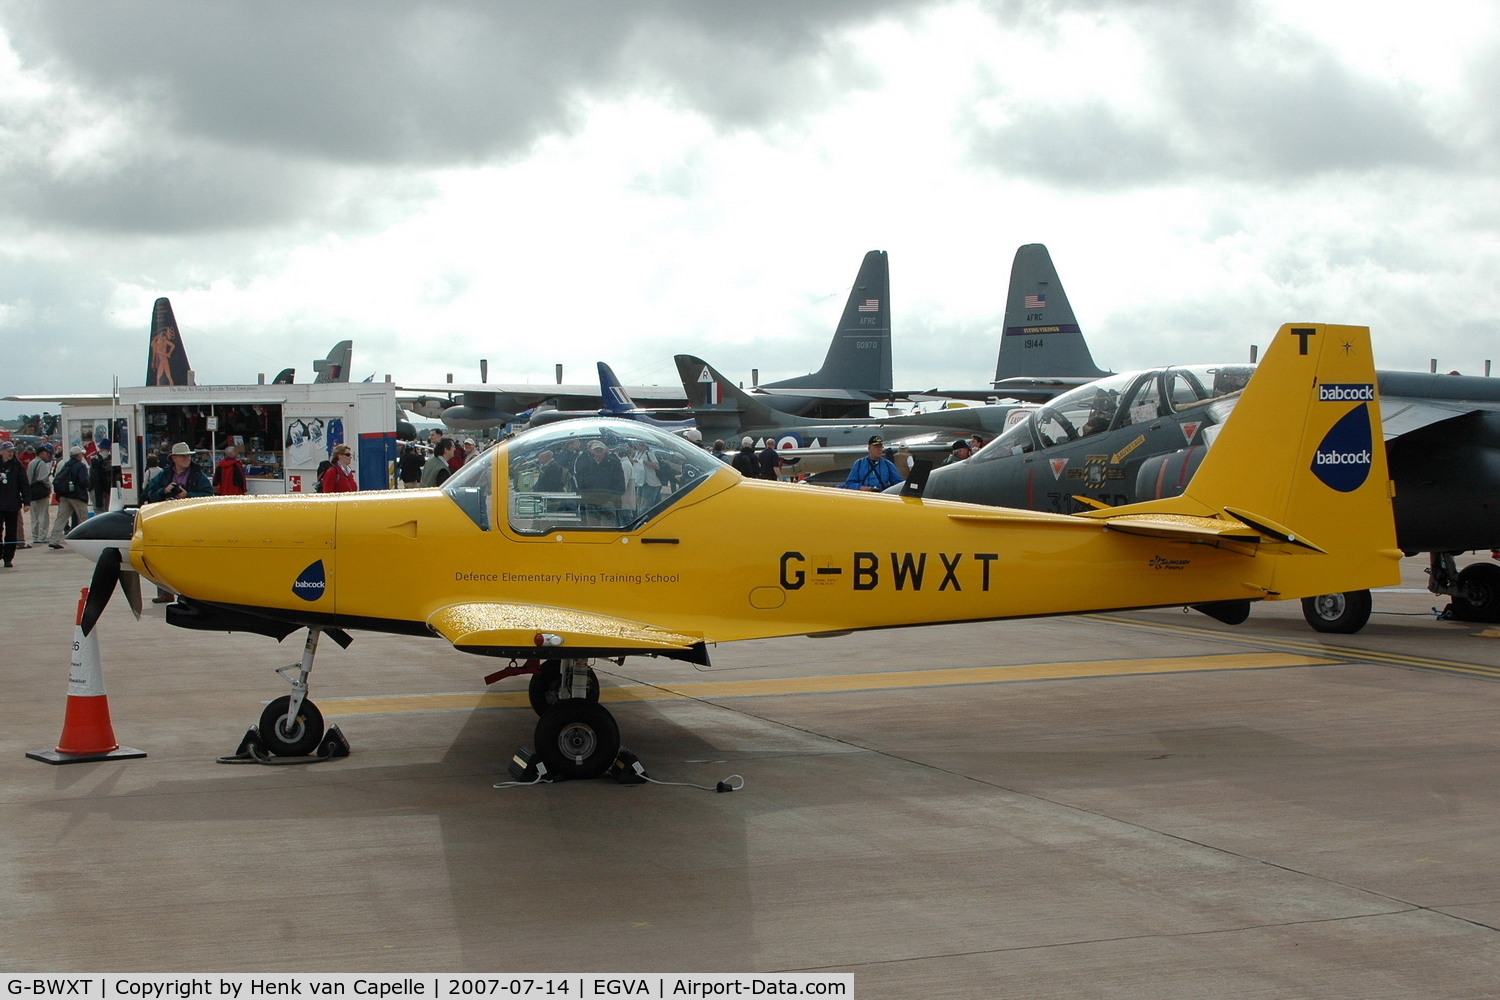 G-BWXT, 1997 Slingsby T-67M-260 Firefly C/N 2254, On the Air Tattoo static display